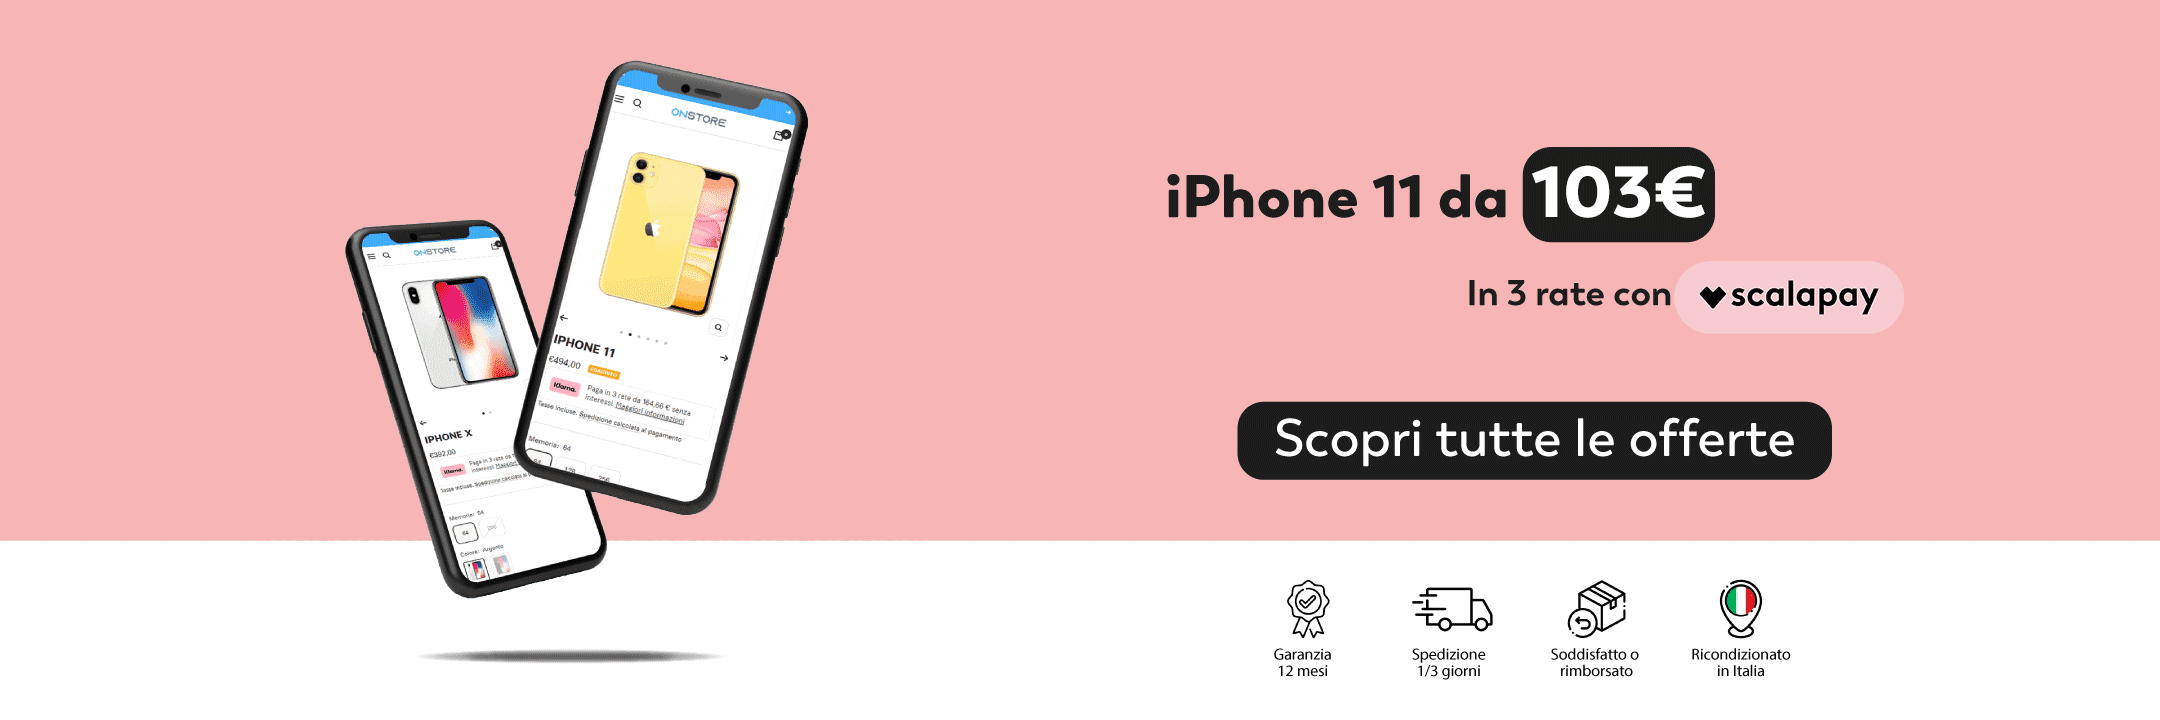 iPhone 11 da 103€ in 3 rate con Scalapay